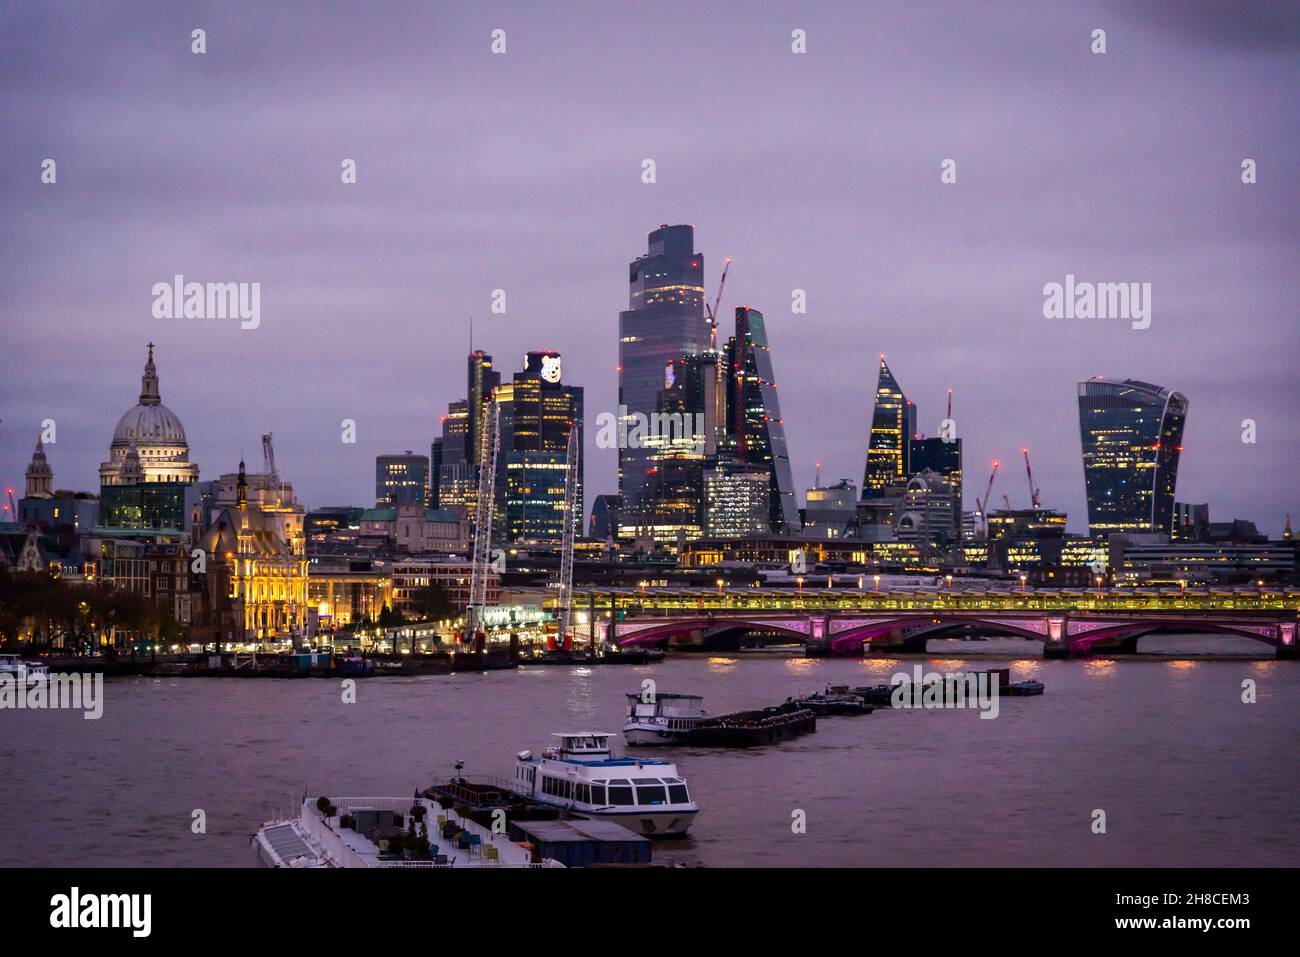 View of the City of London from Waterloo bridge at dusk, London, England, UK Stock Photo